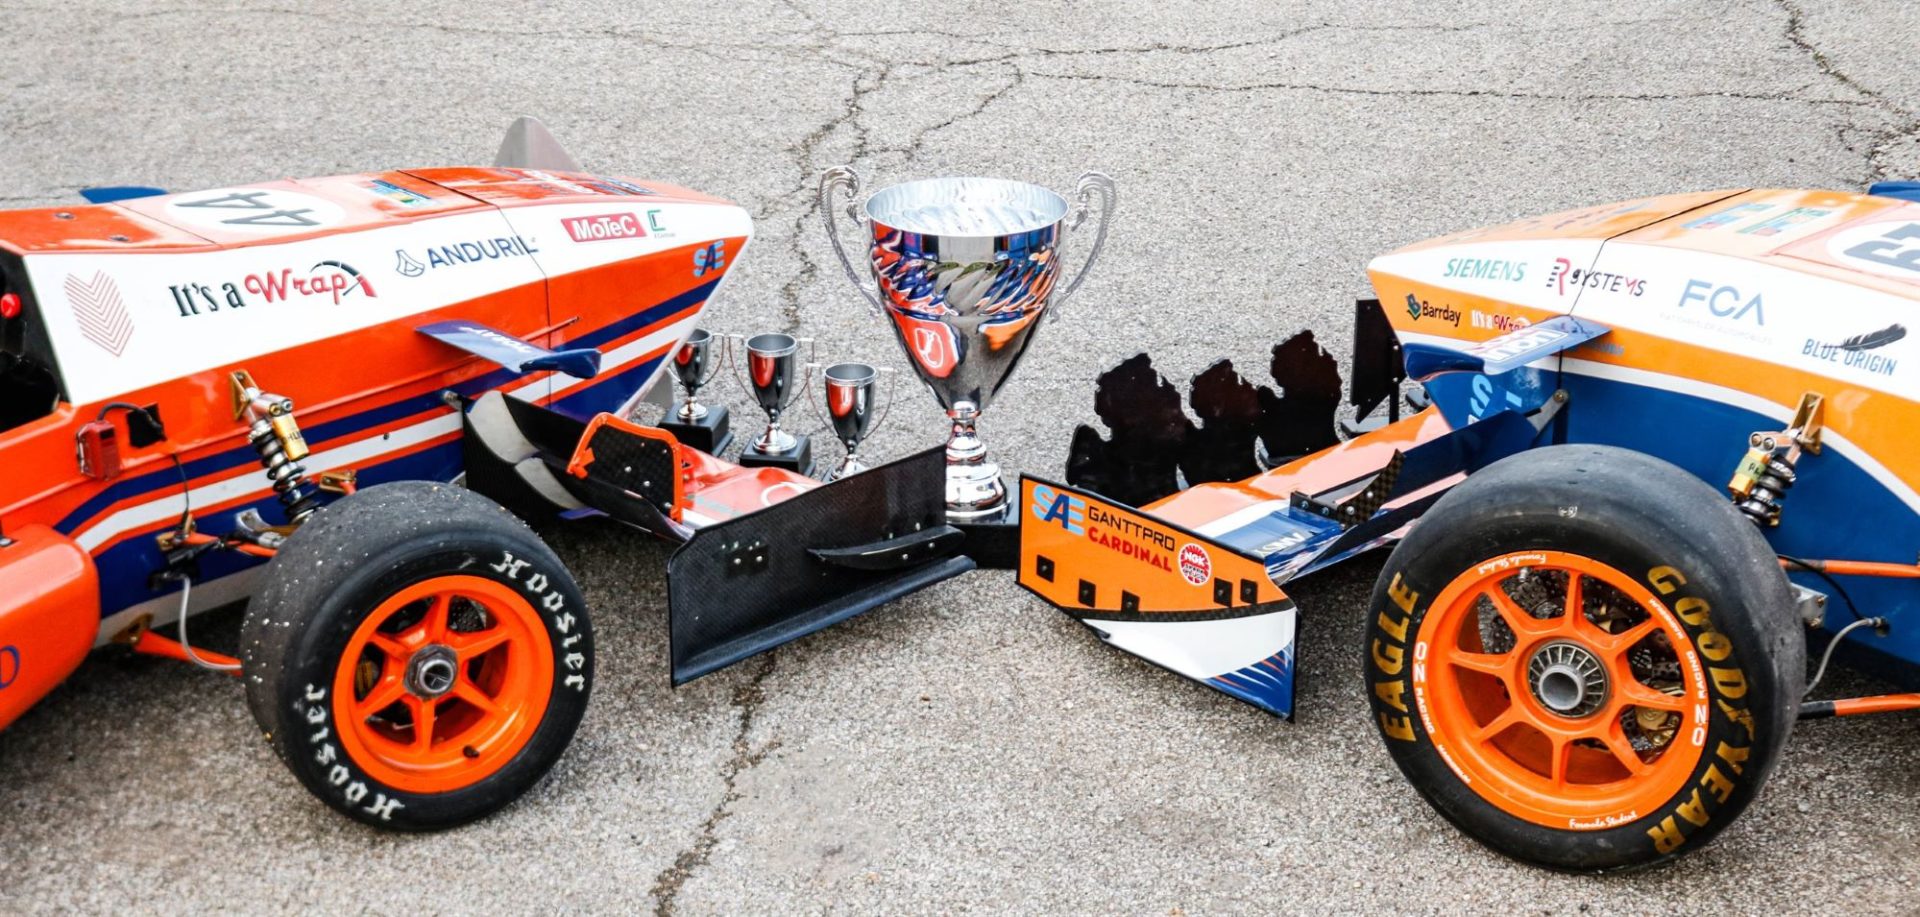 The University of Illinois Formula SAE team is the best in the world